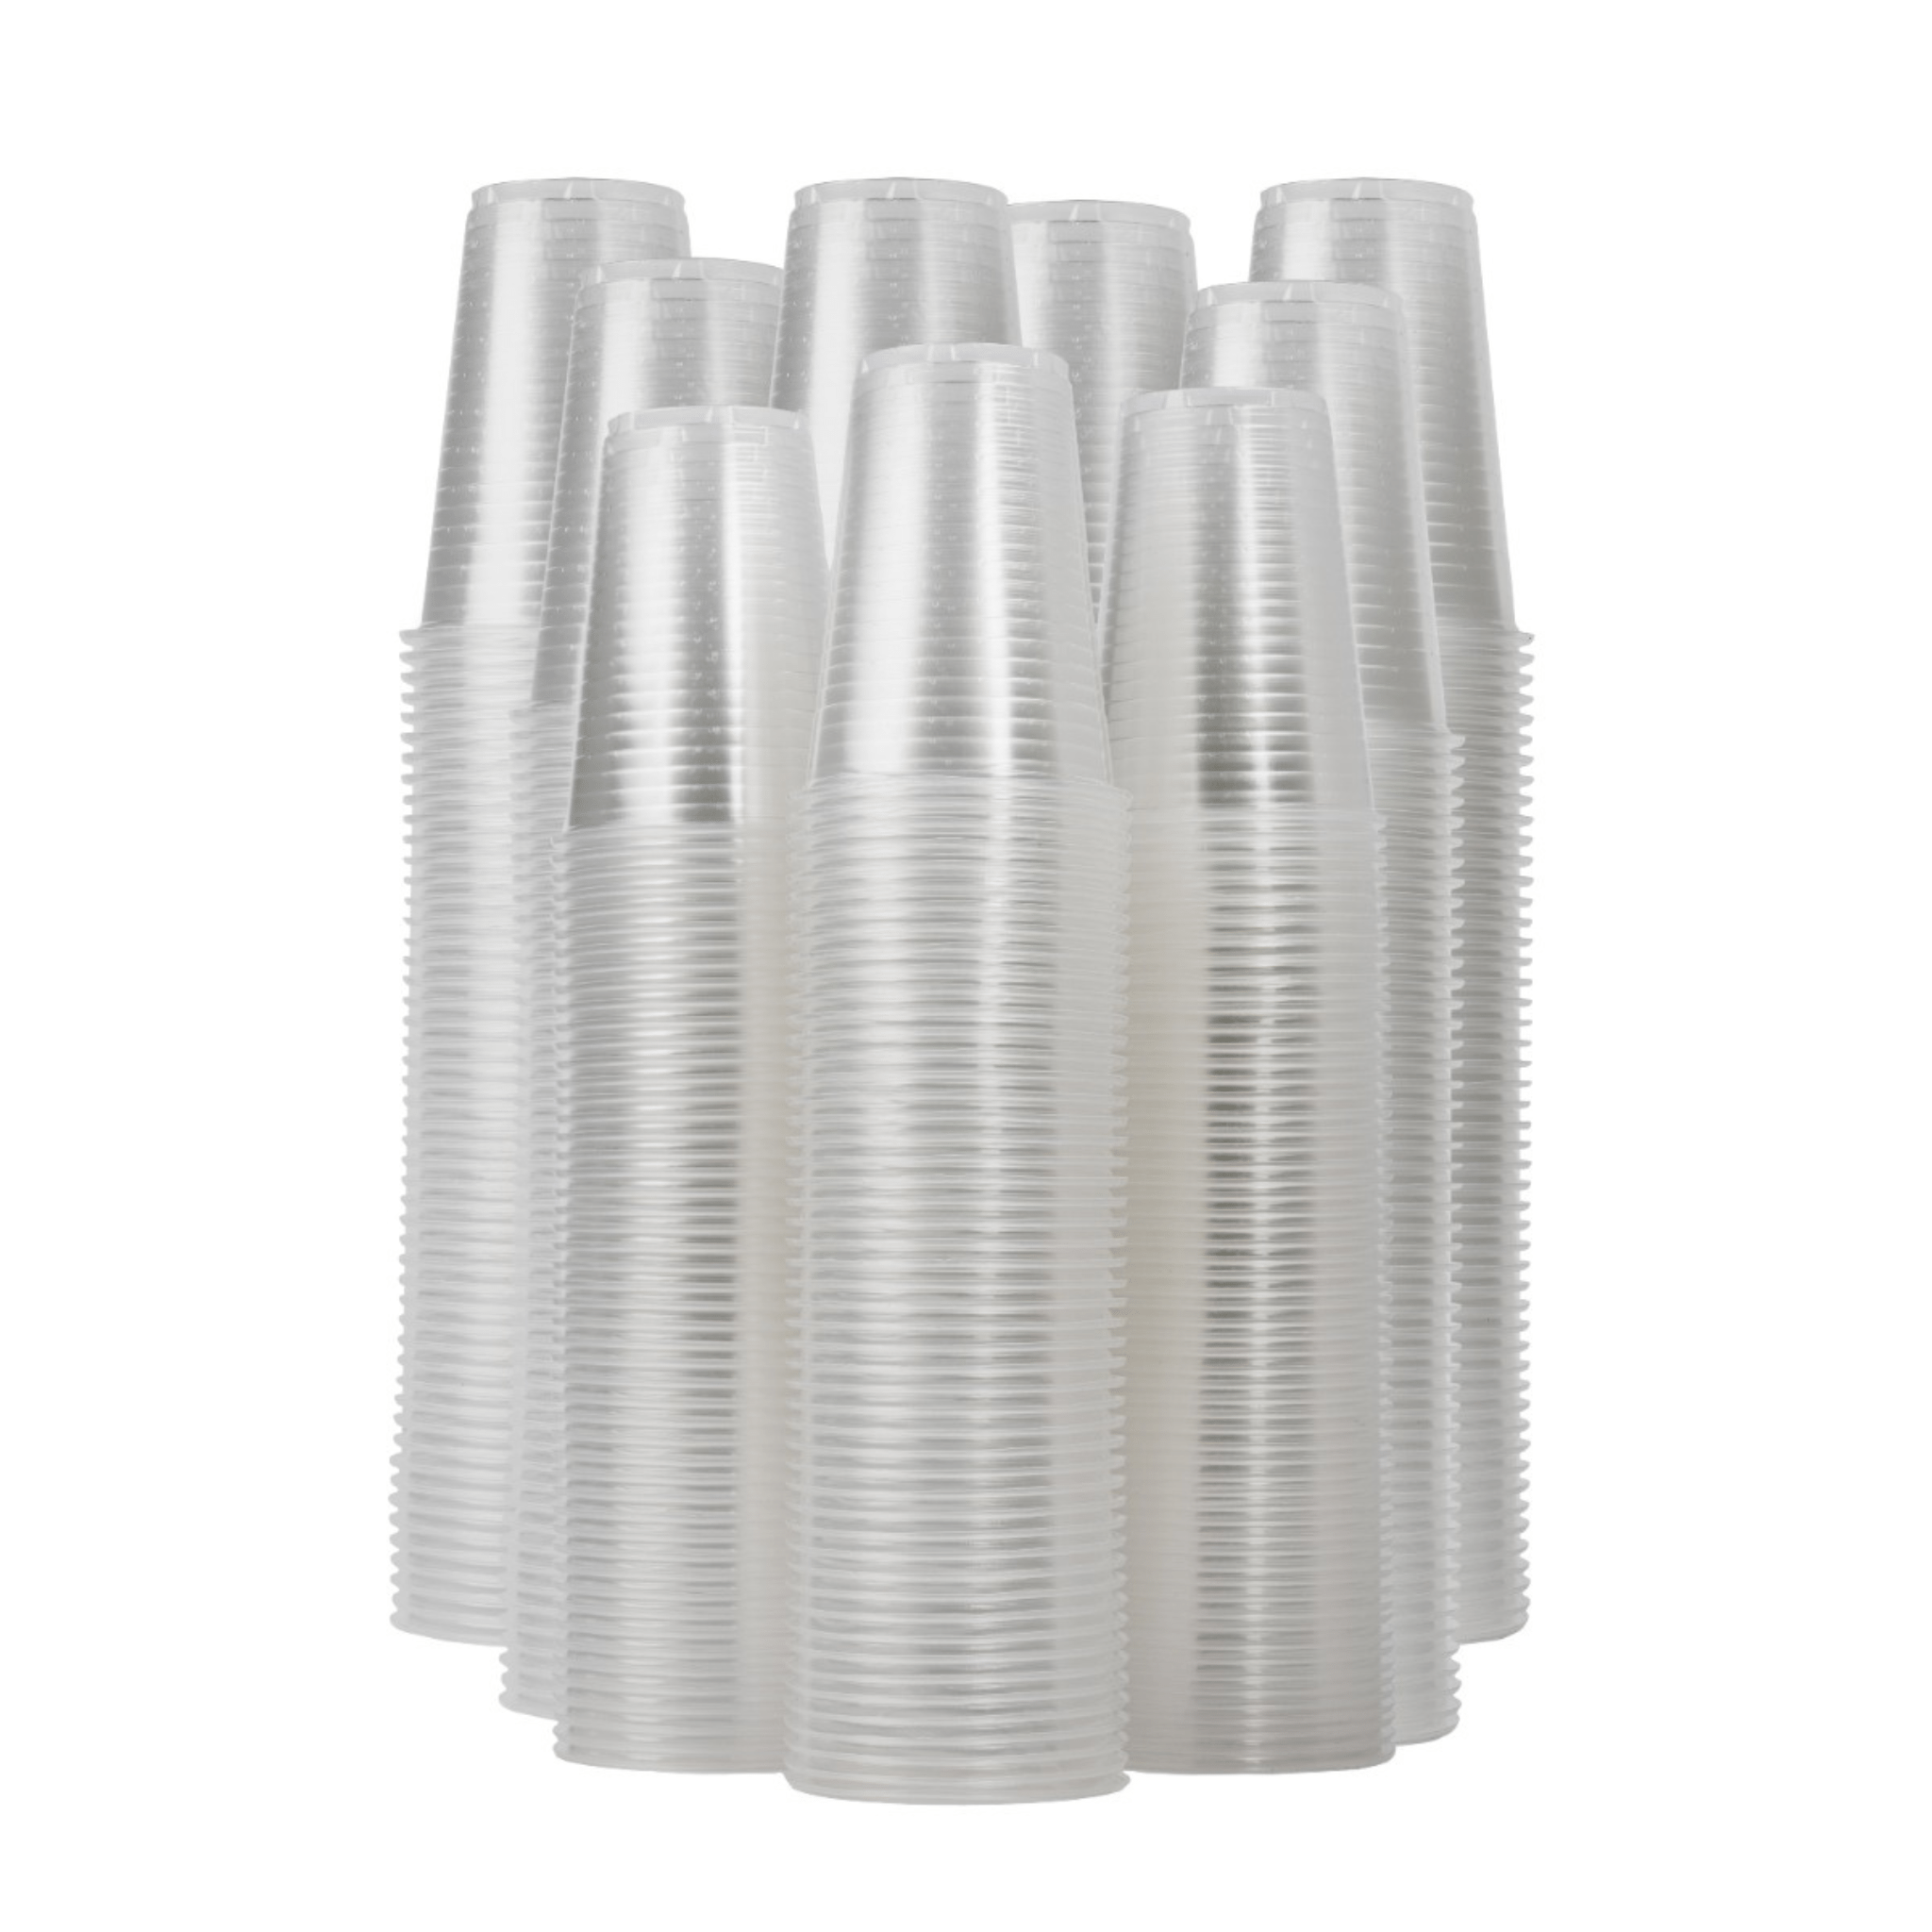 7 Oz. Clear Plastic Cups | 2800 Count